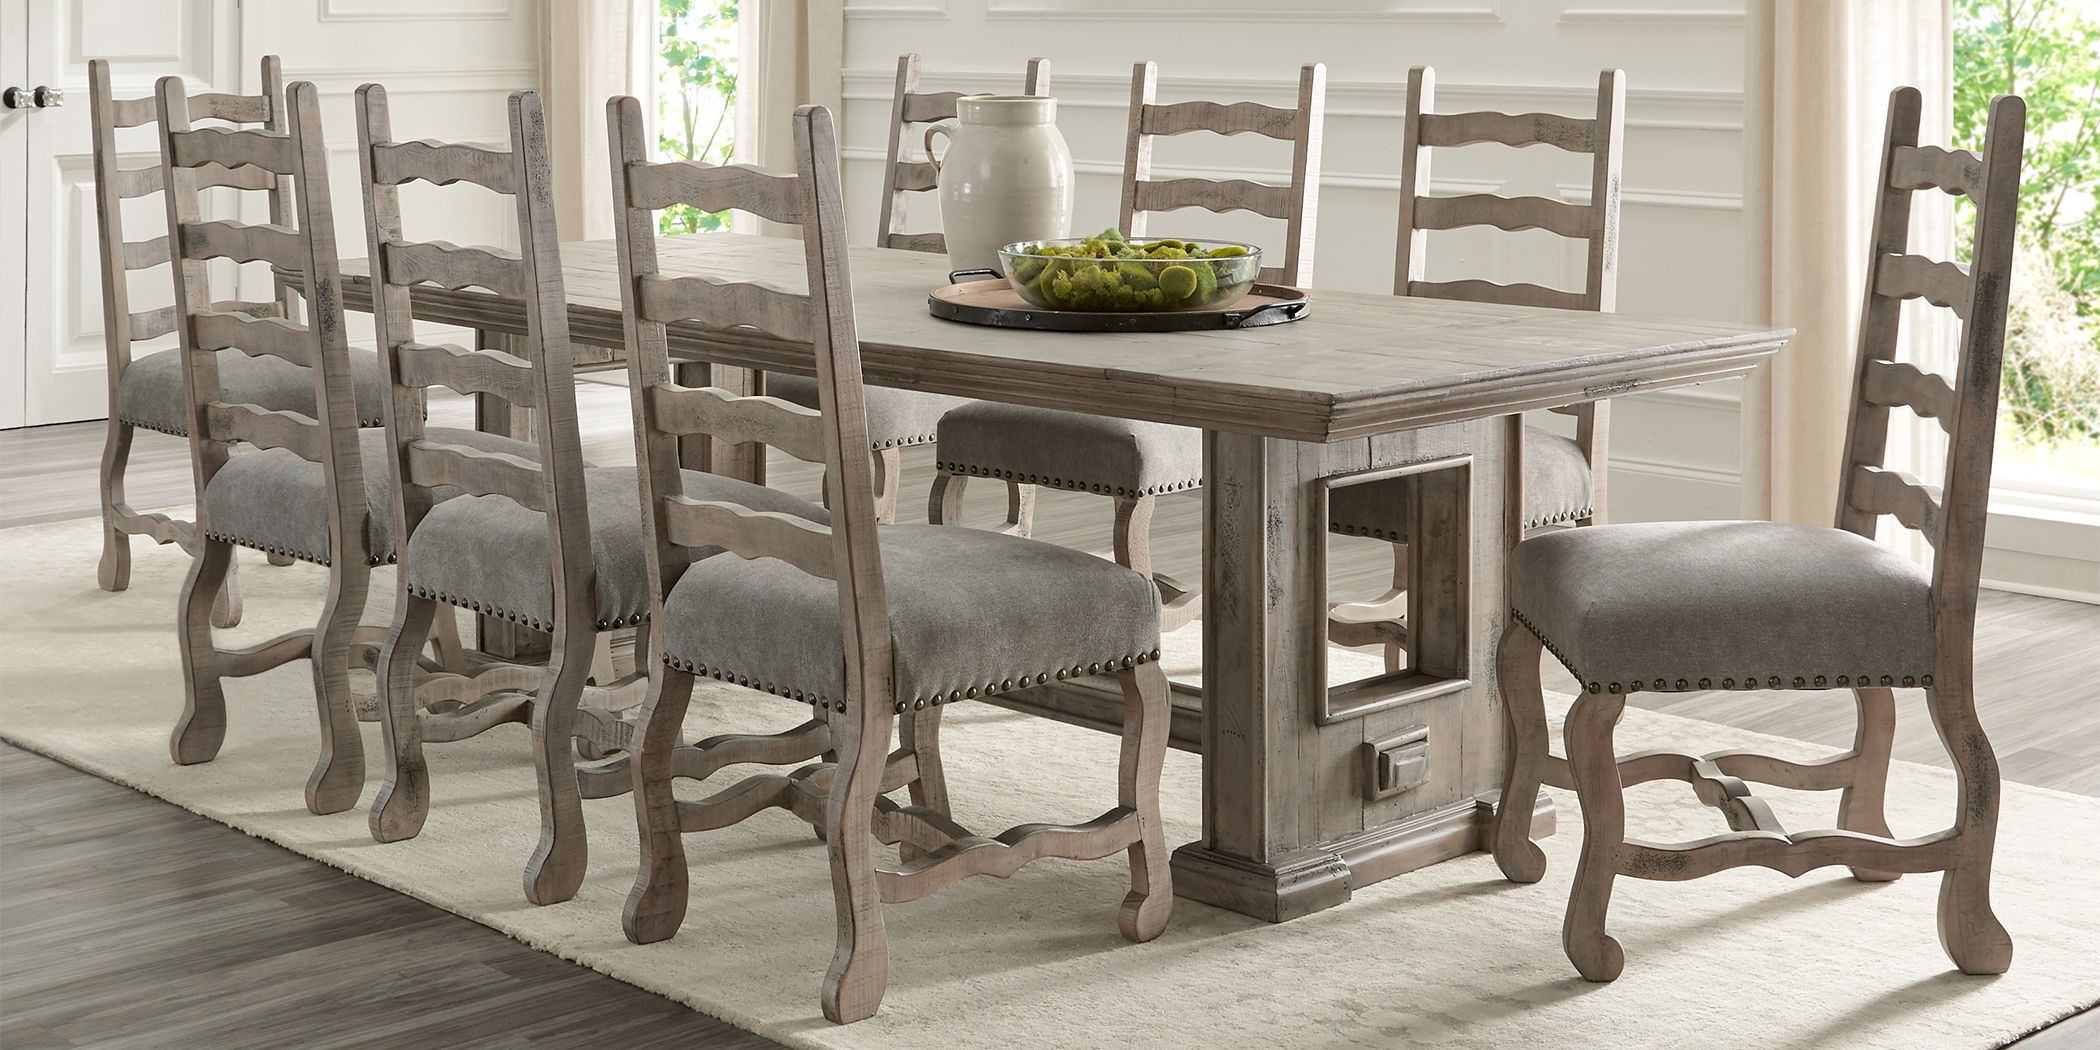 Cindy Crawford Home Pine Manor Brown 9, Rooms To Go Cindy Crawford Dining Room Sets